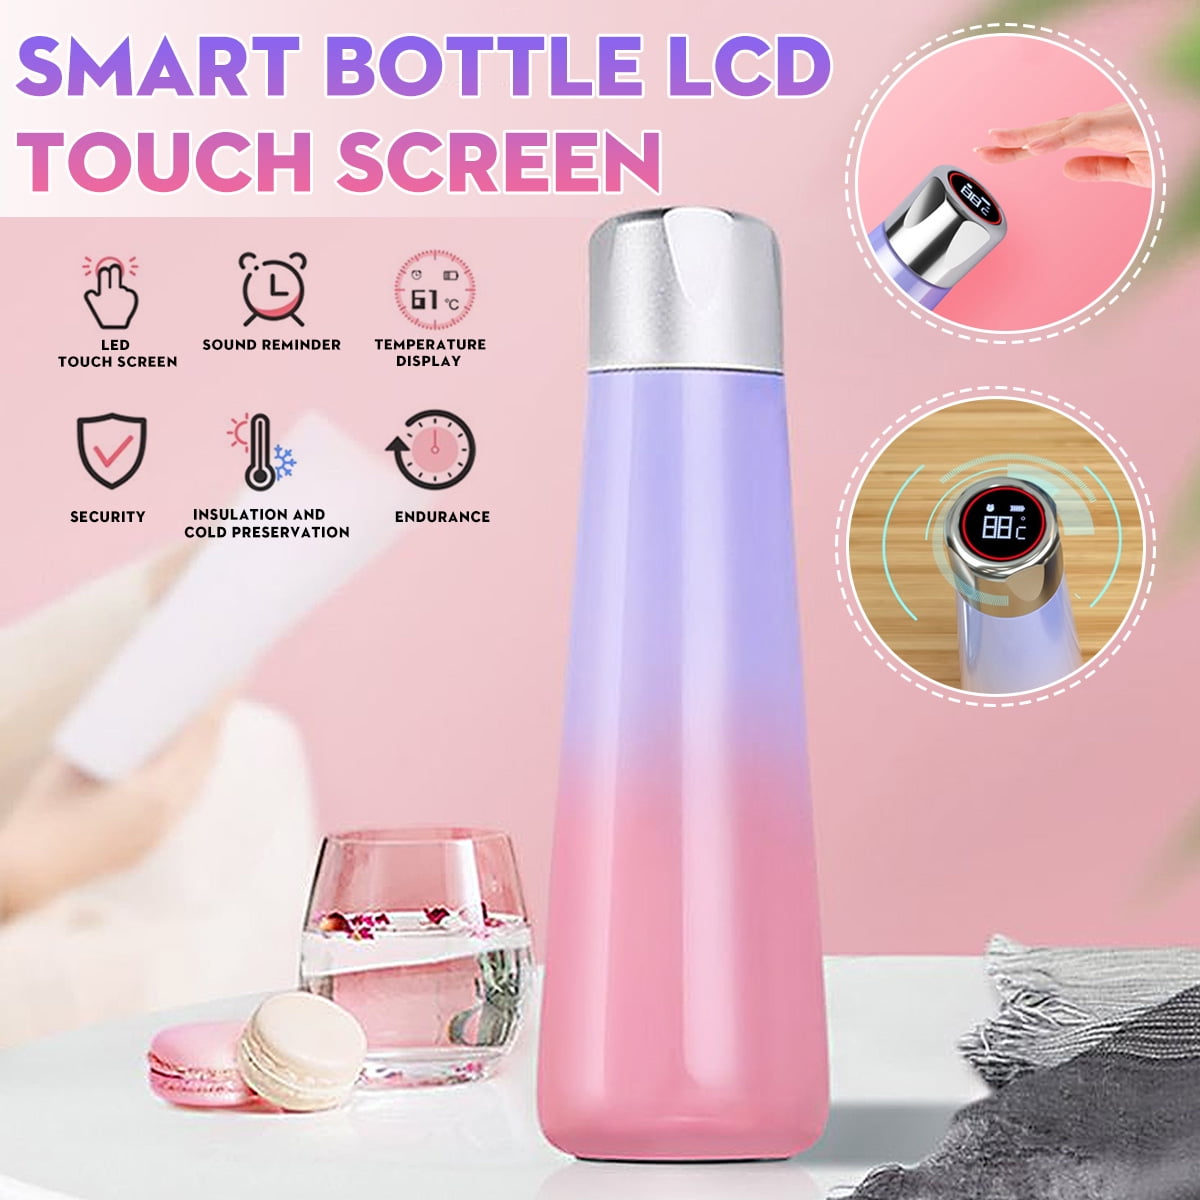 bottle with reminder to drink water